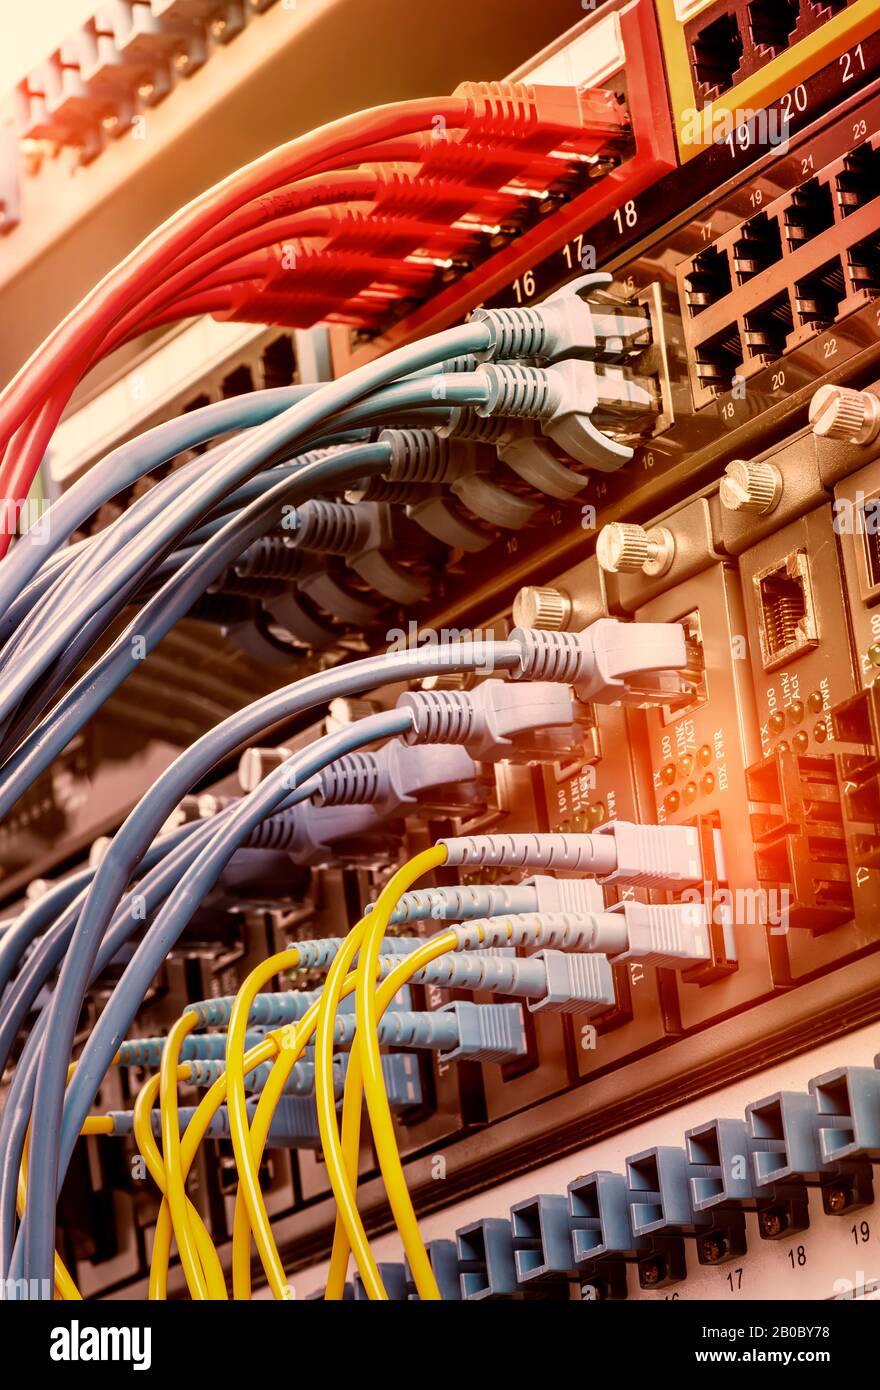 Fiber Optic cables connected to optic ports and UTP, Network cables connected to ethernet ports. Stock Photo